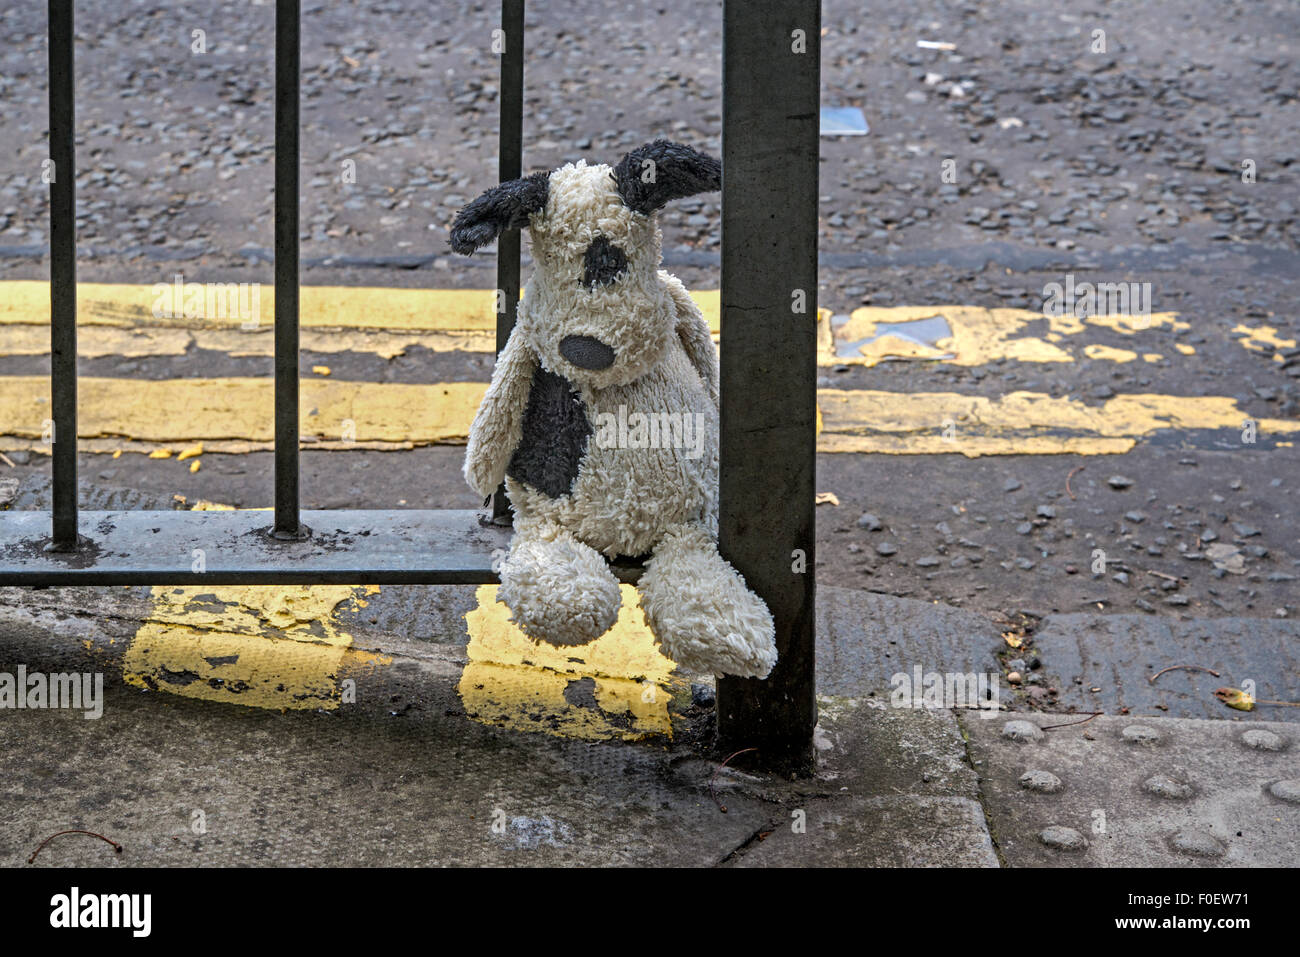 A child's lost cuddly toy dog sitting on railings waiting to be found. Stock Photo